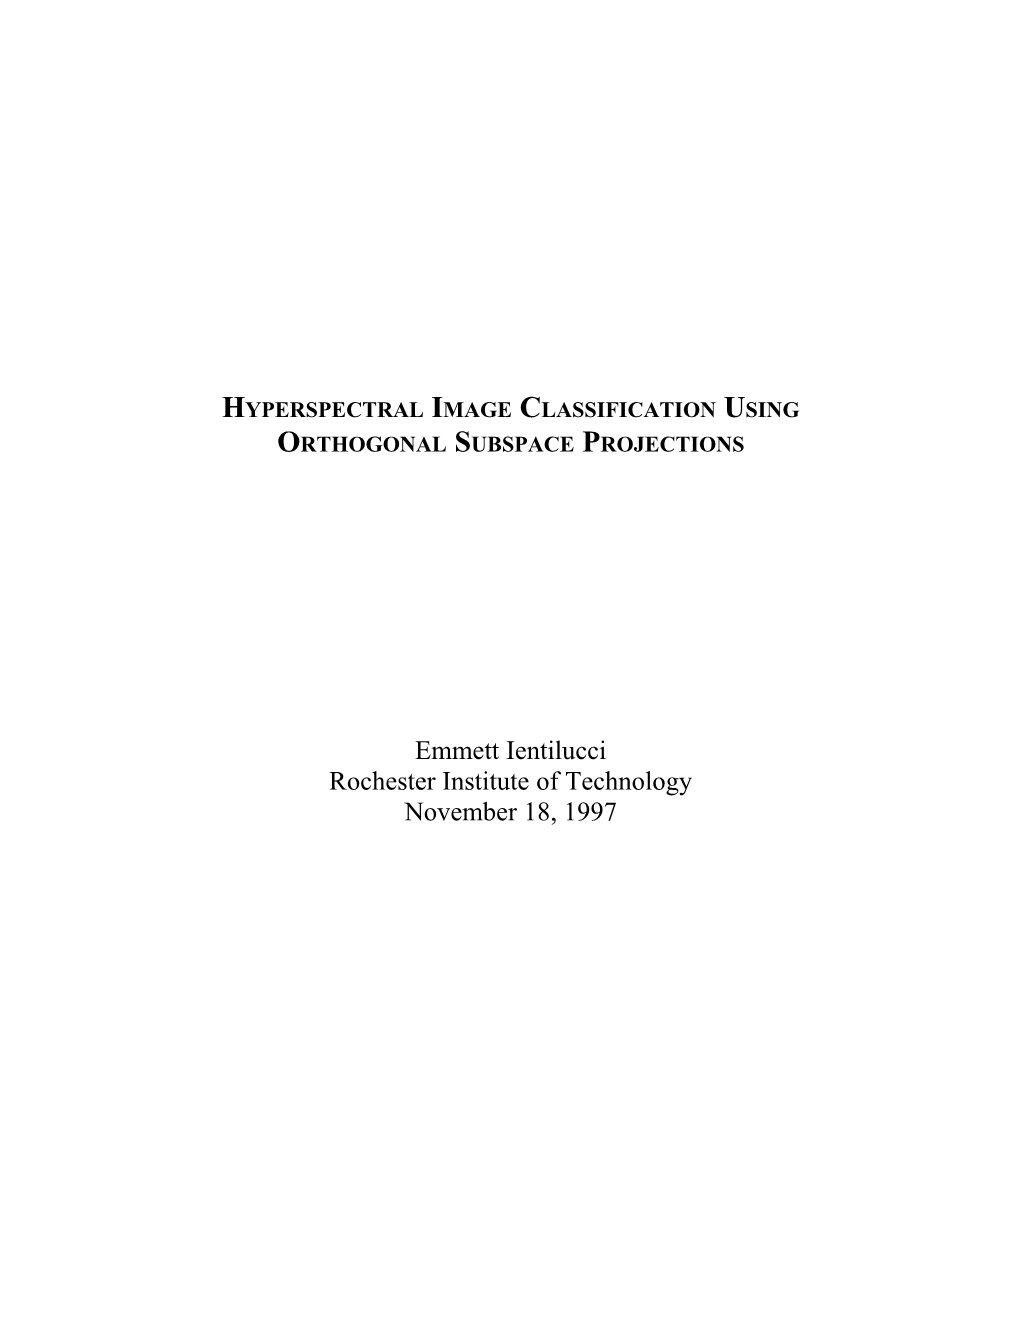 Hyperspectral Image Classification Using Orthogonal Subspace Projections